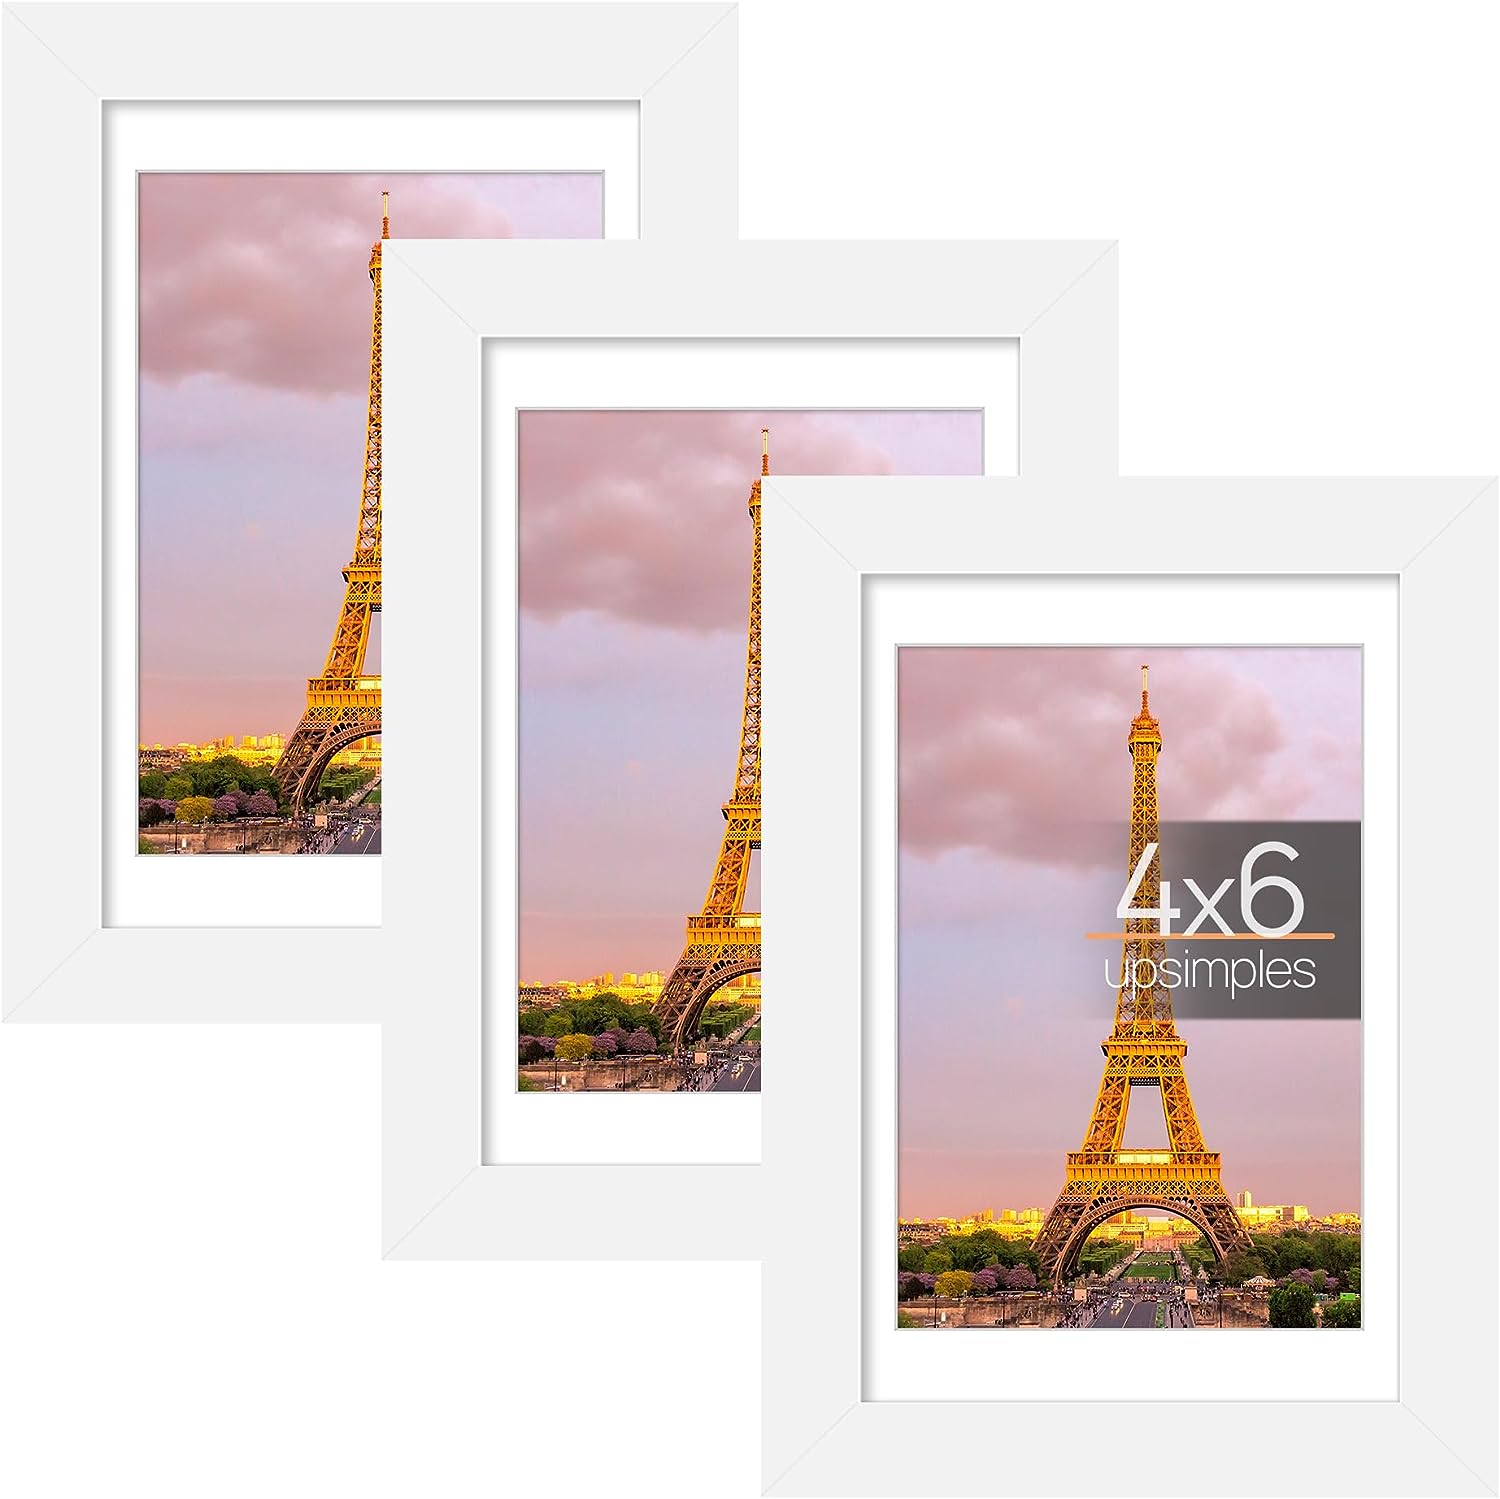 upsimples 4x6 Picture Frame Set of 3, Made of High Definition